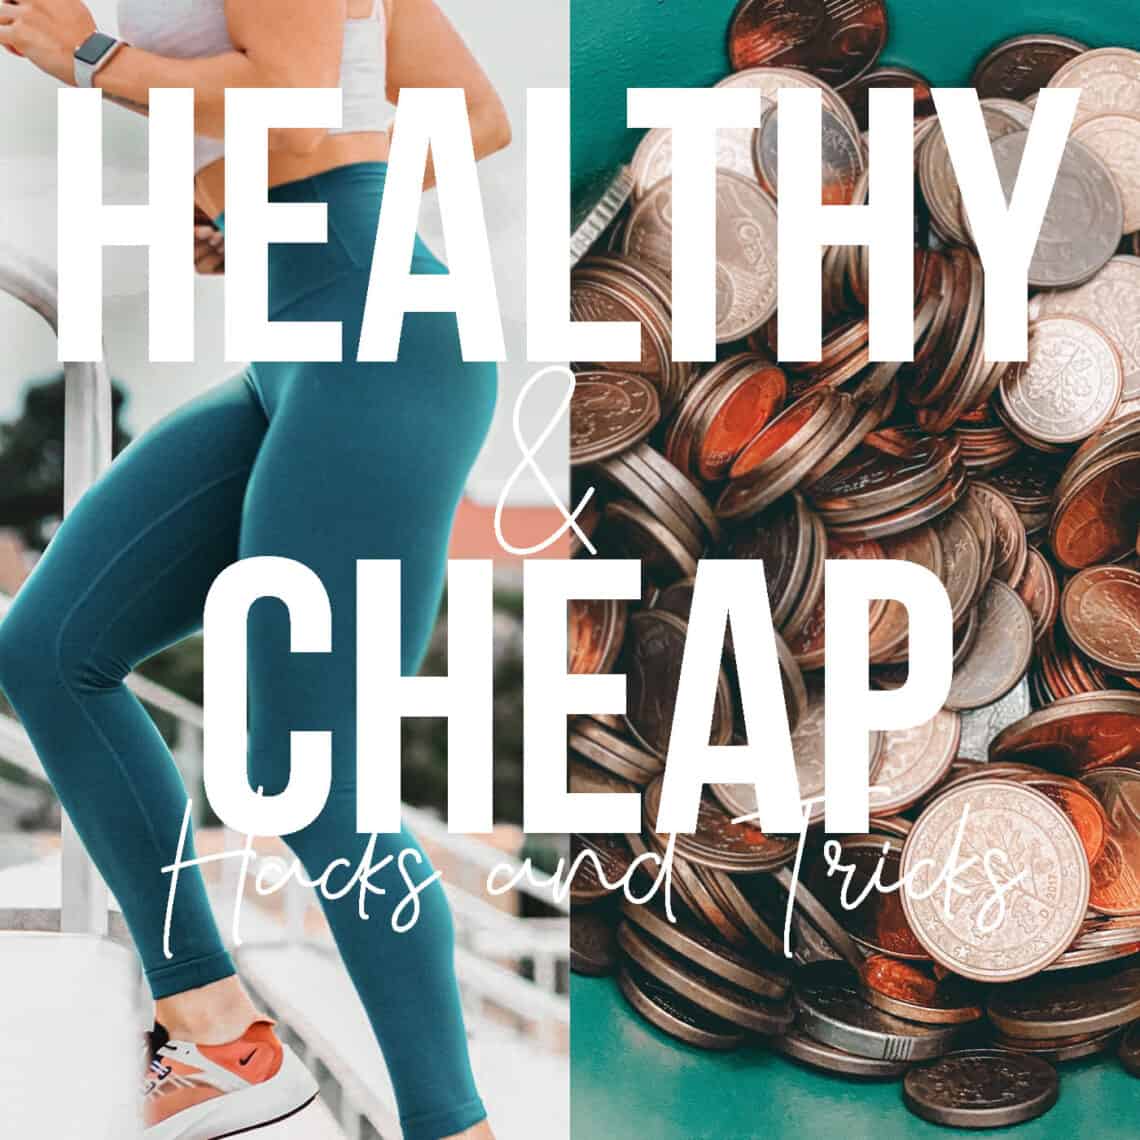 Healthy cheap meals hacks and tricks